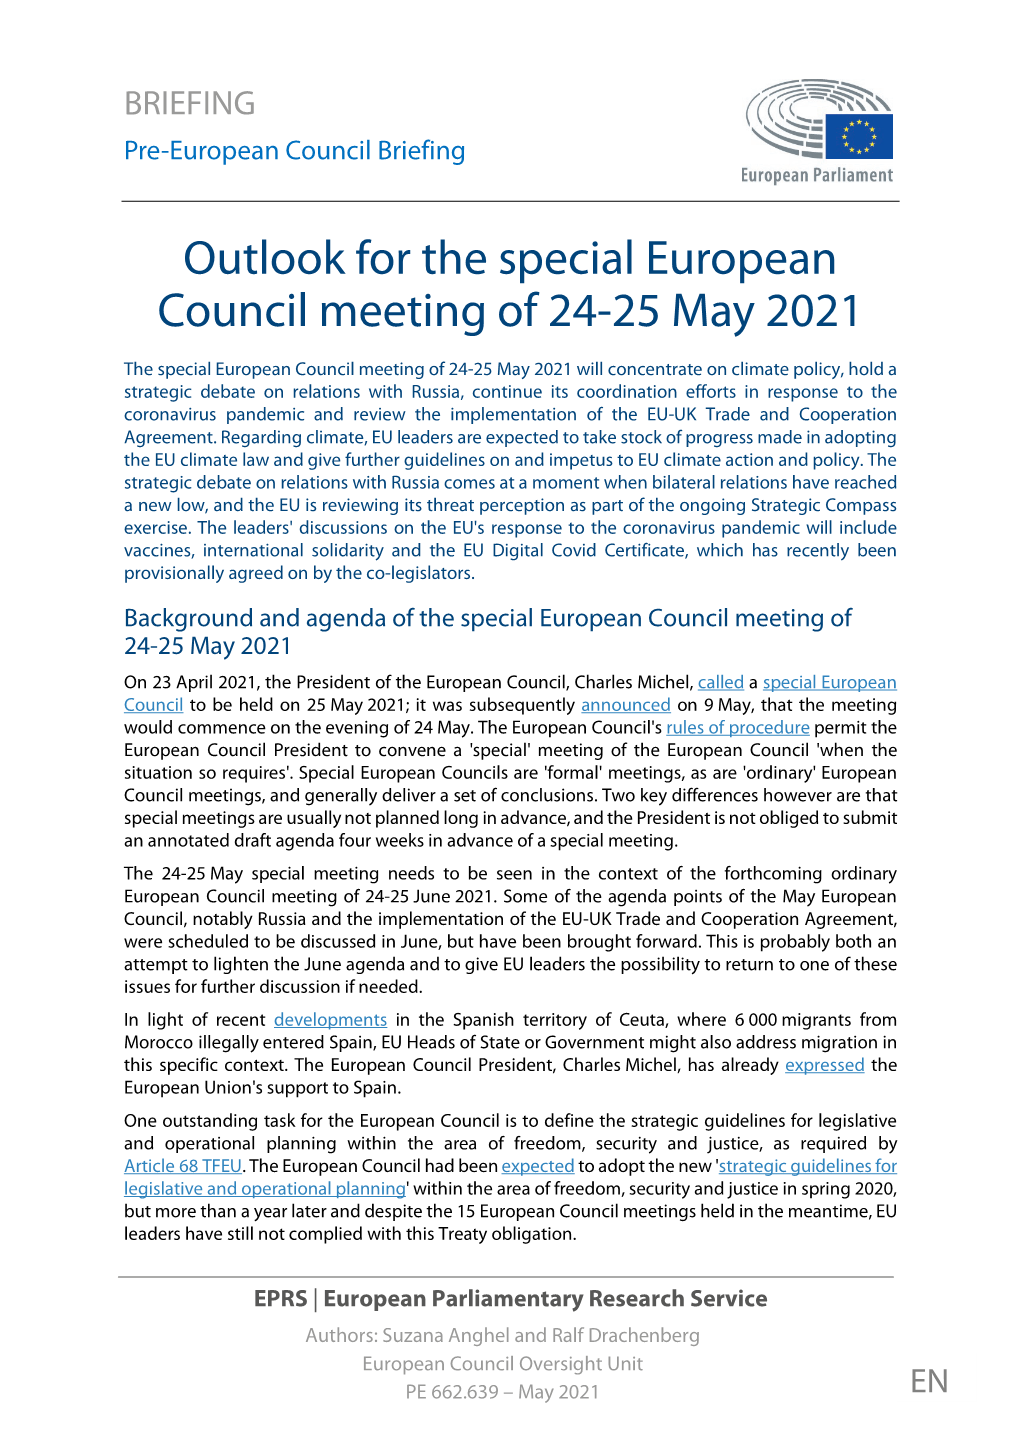 Outlook for the Special European Council Meeting of 24-25 May 2021